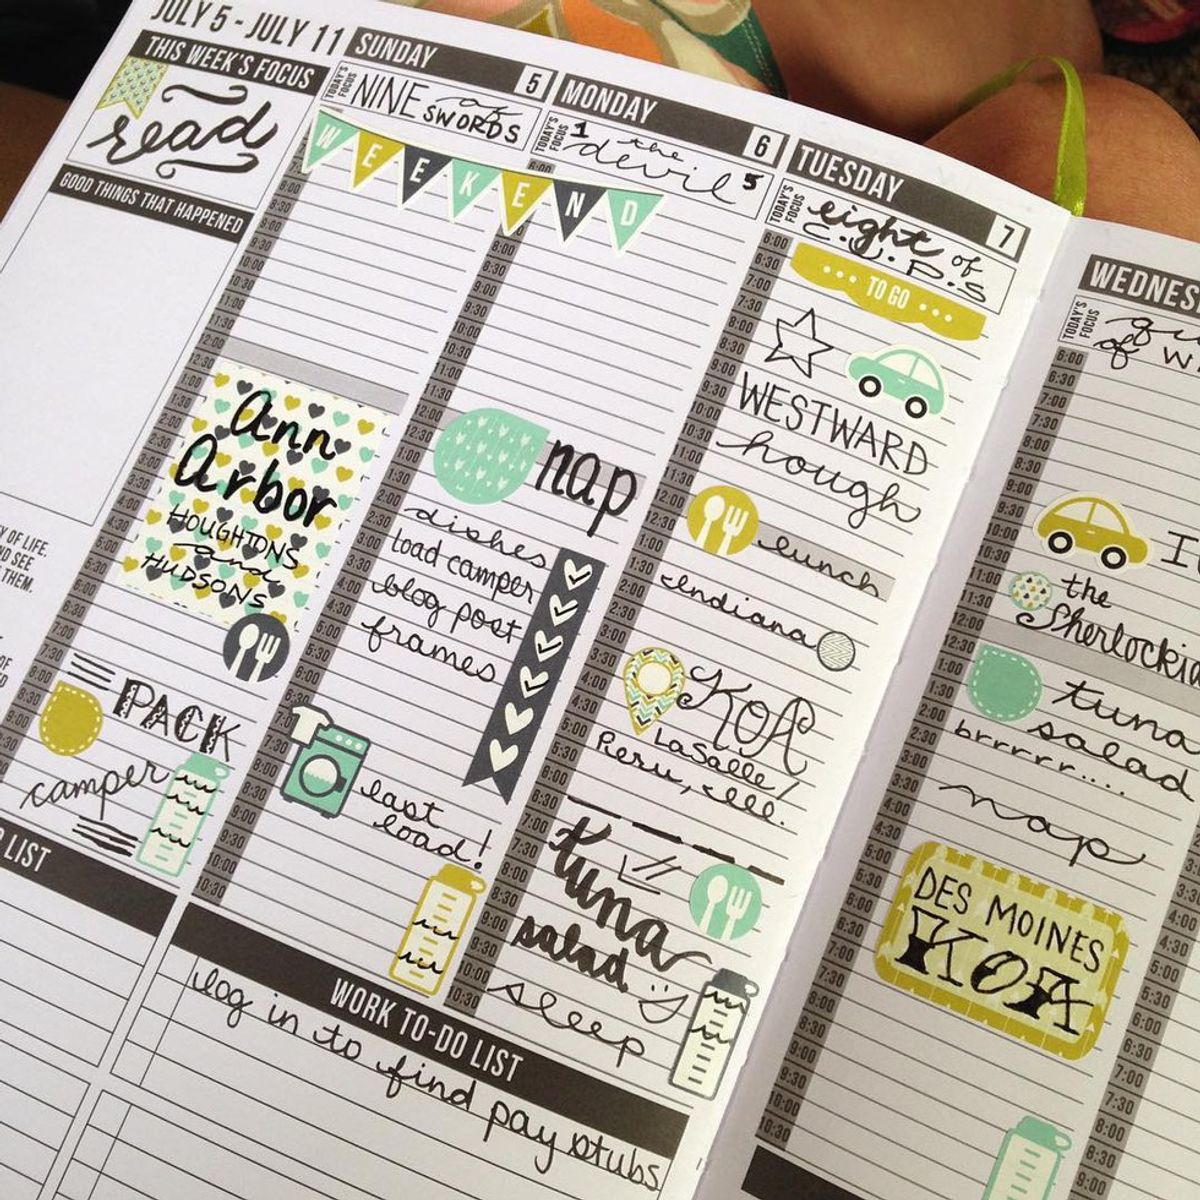 How My Passion Planner Changed My Life